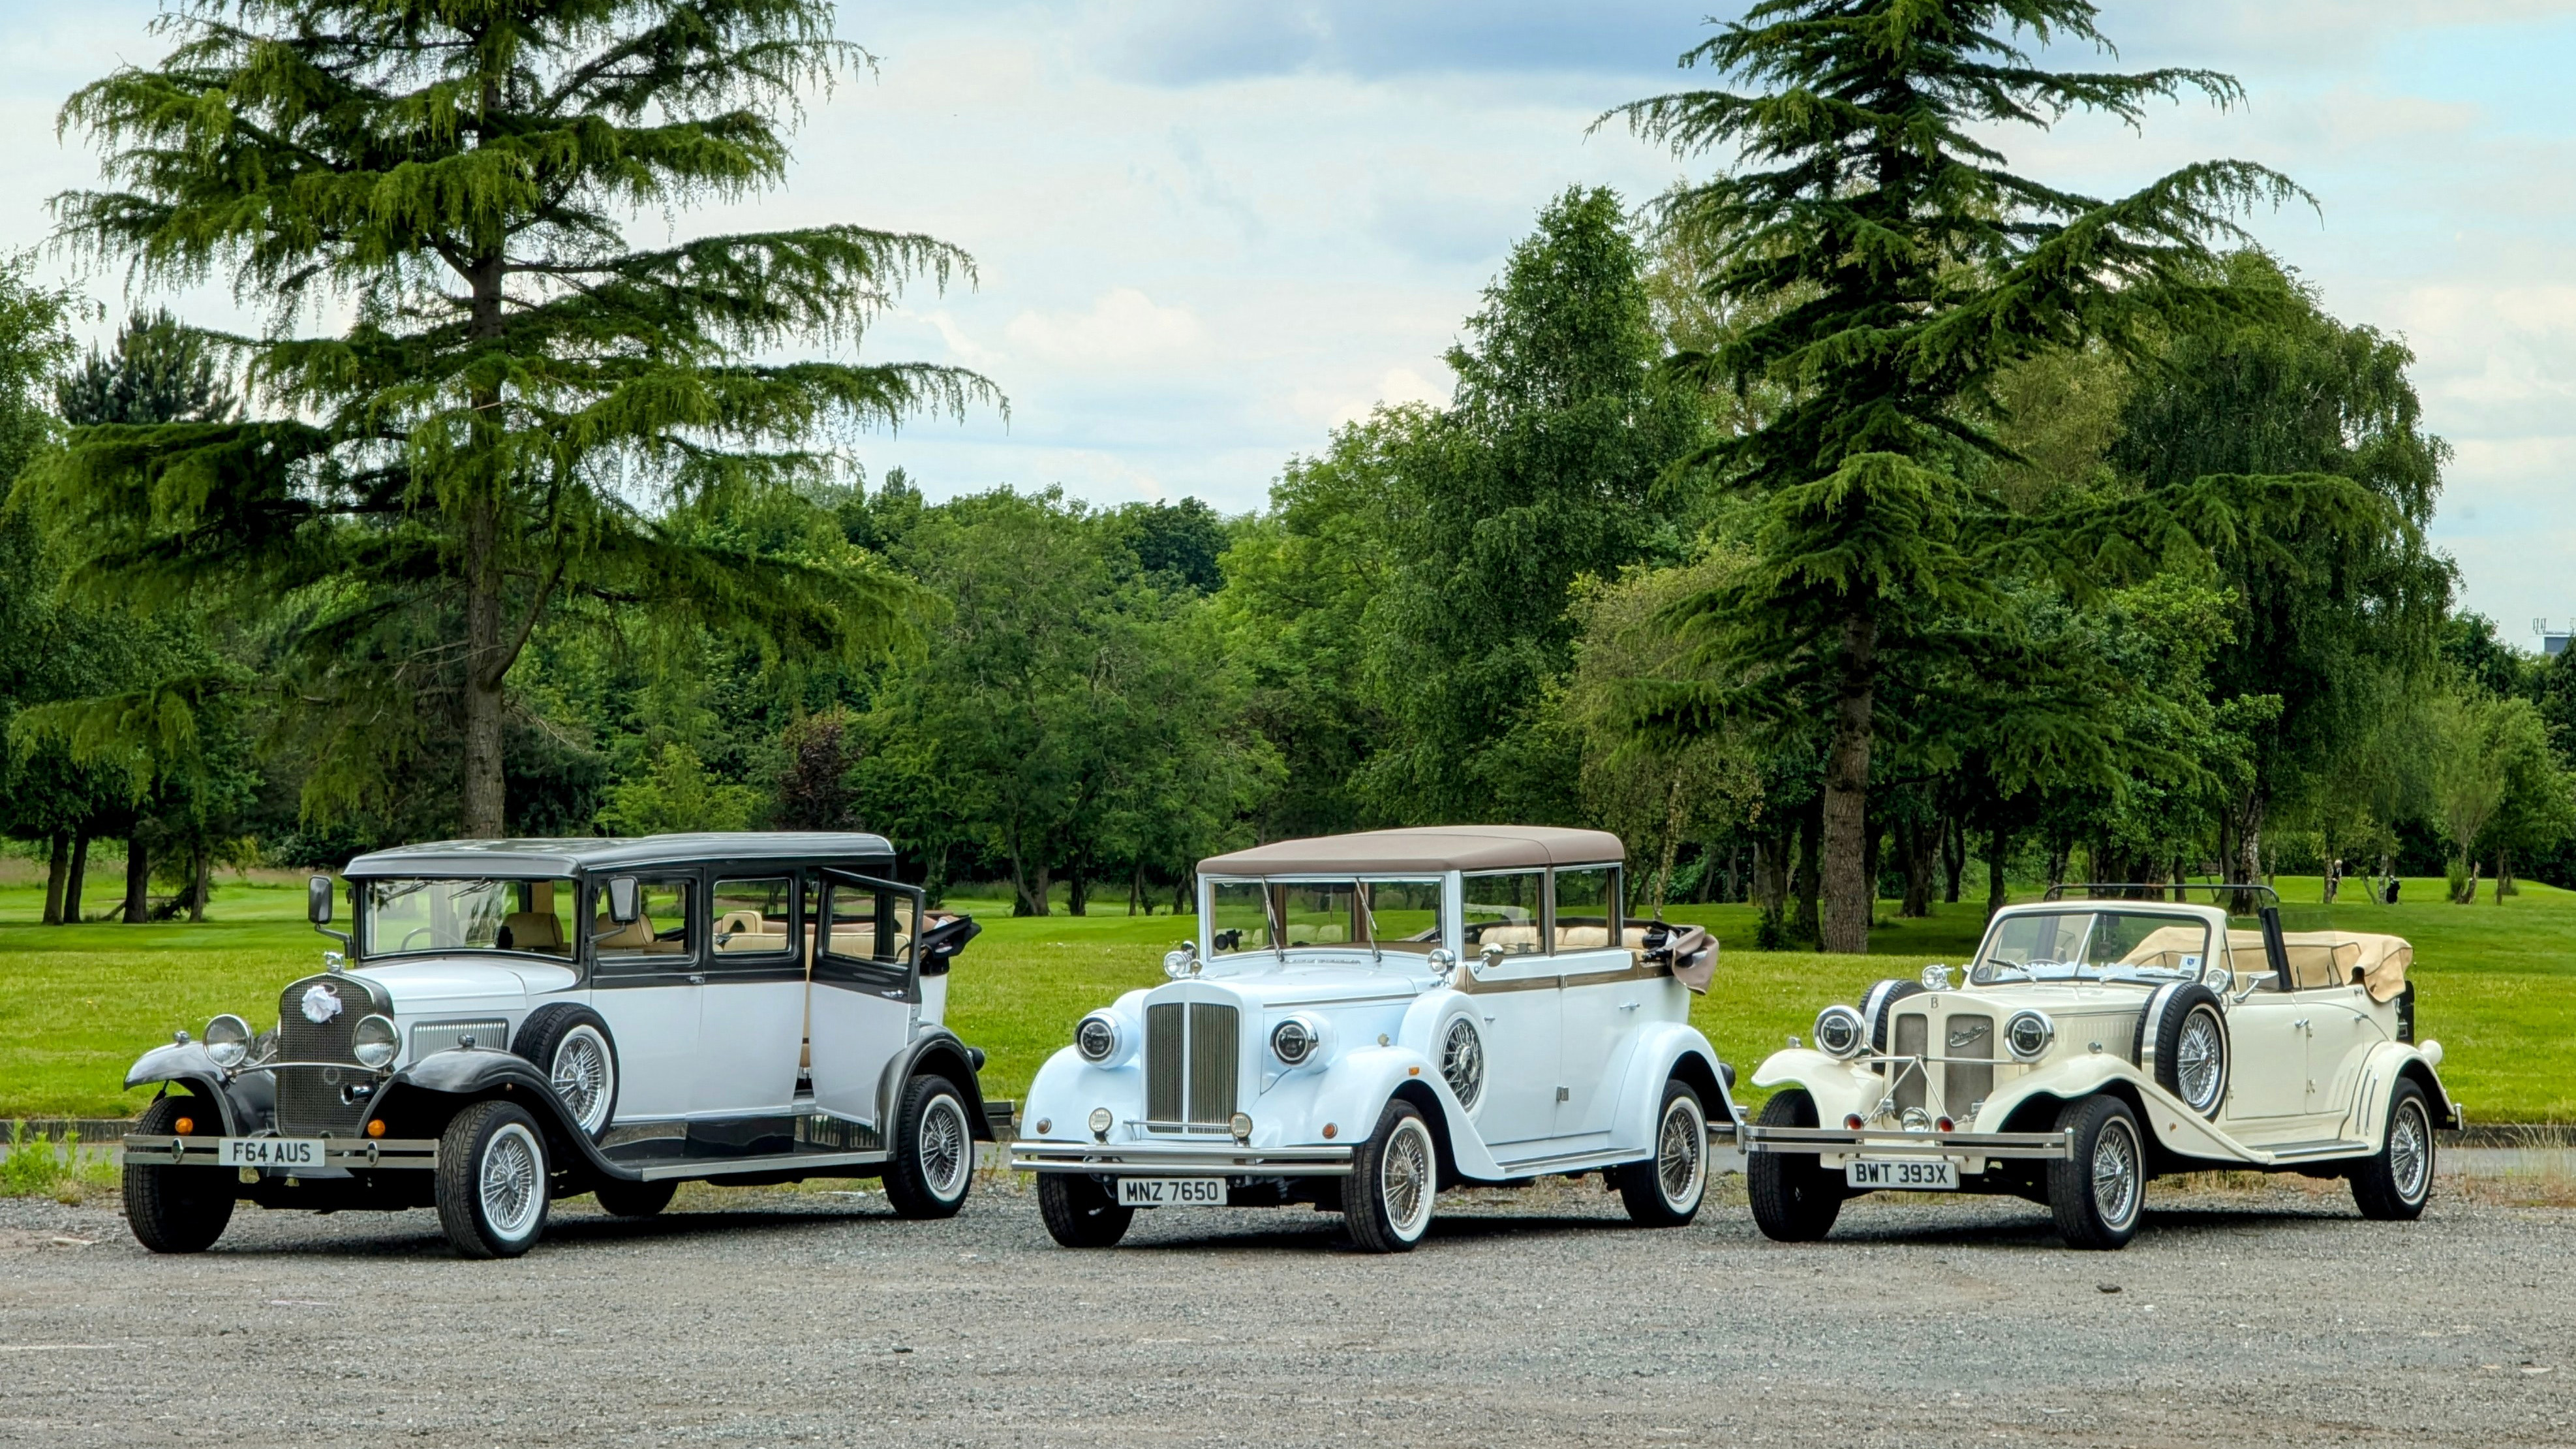 Three 1930s vintage Style convertible Wedding Cars. From left to right we have an ivory Bramwith, White Regent and an Ivory Beauford. Photo taken in a local West Yorkshire park with green trees in the background.